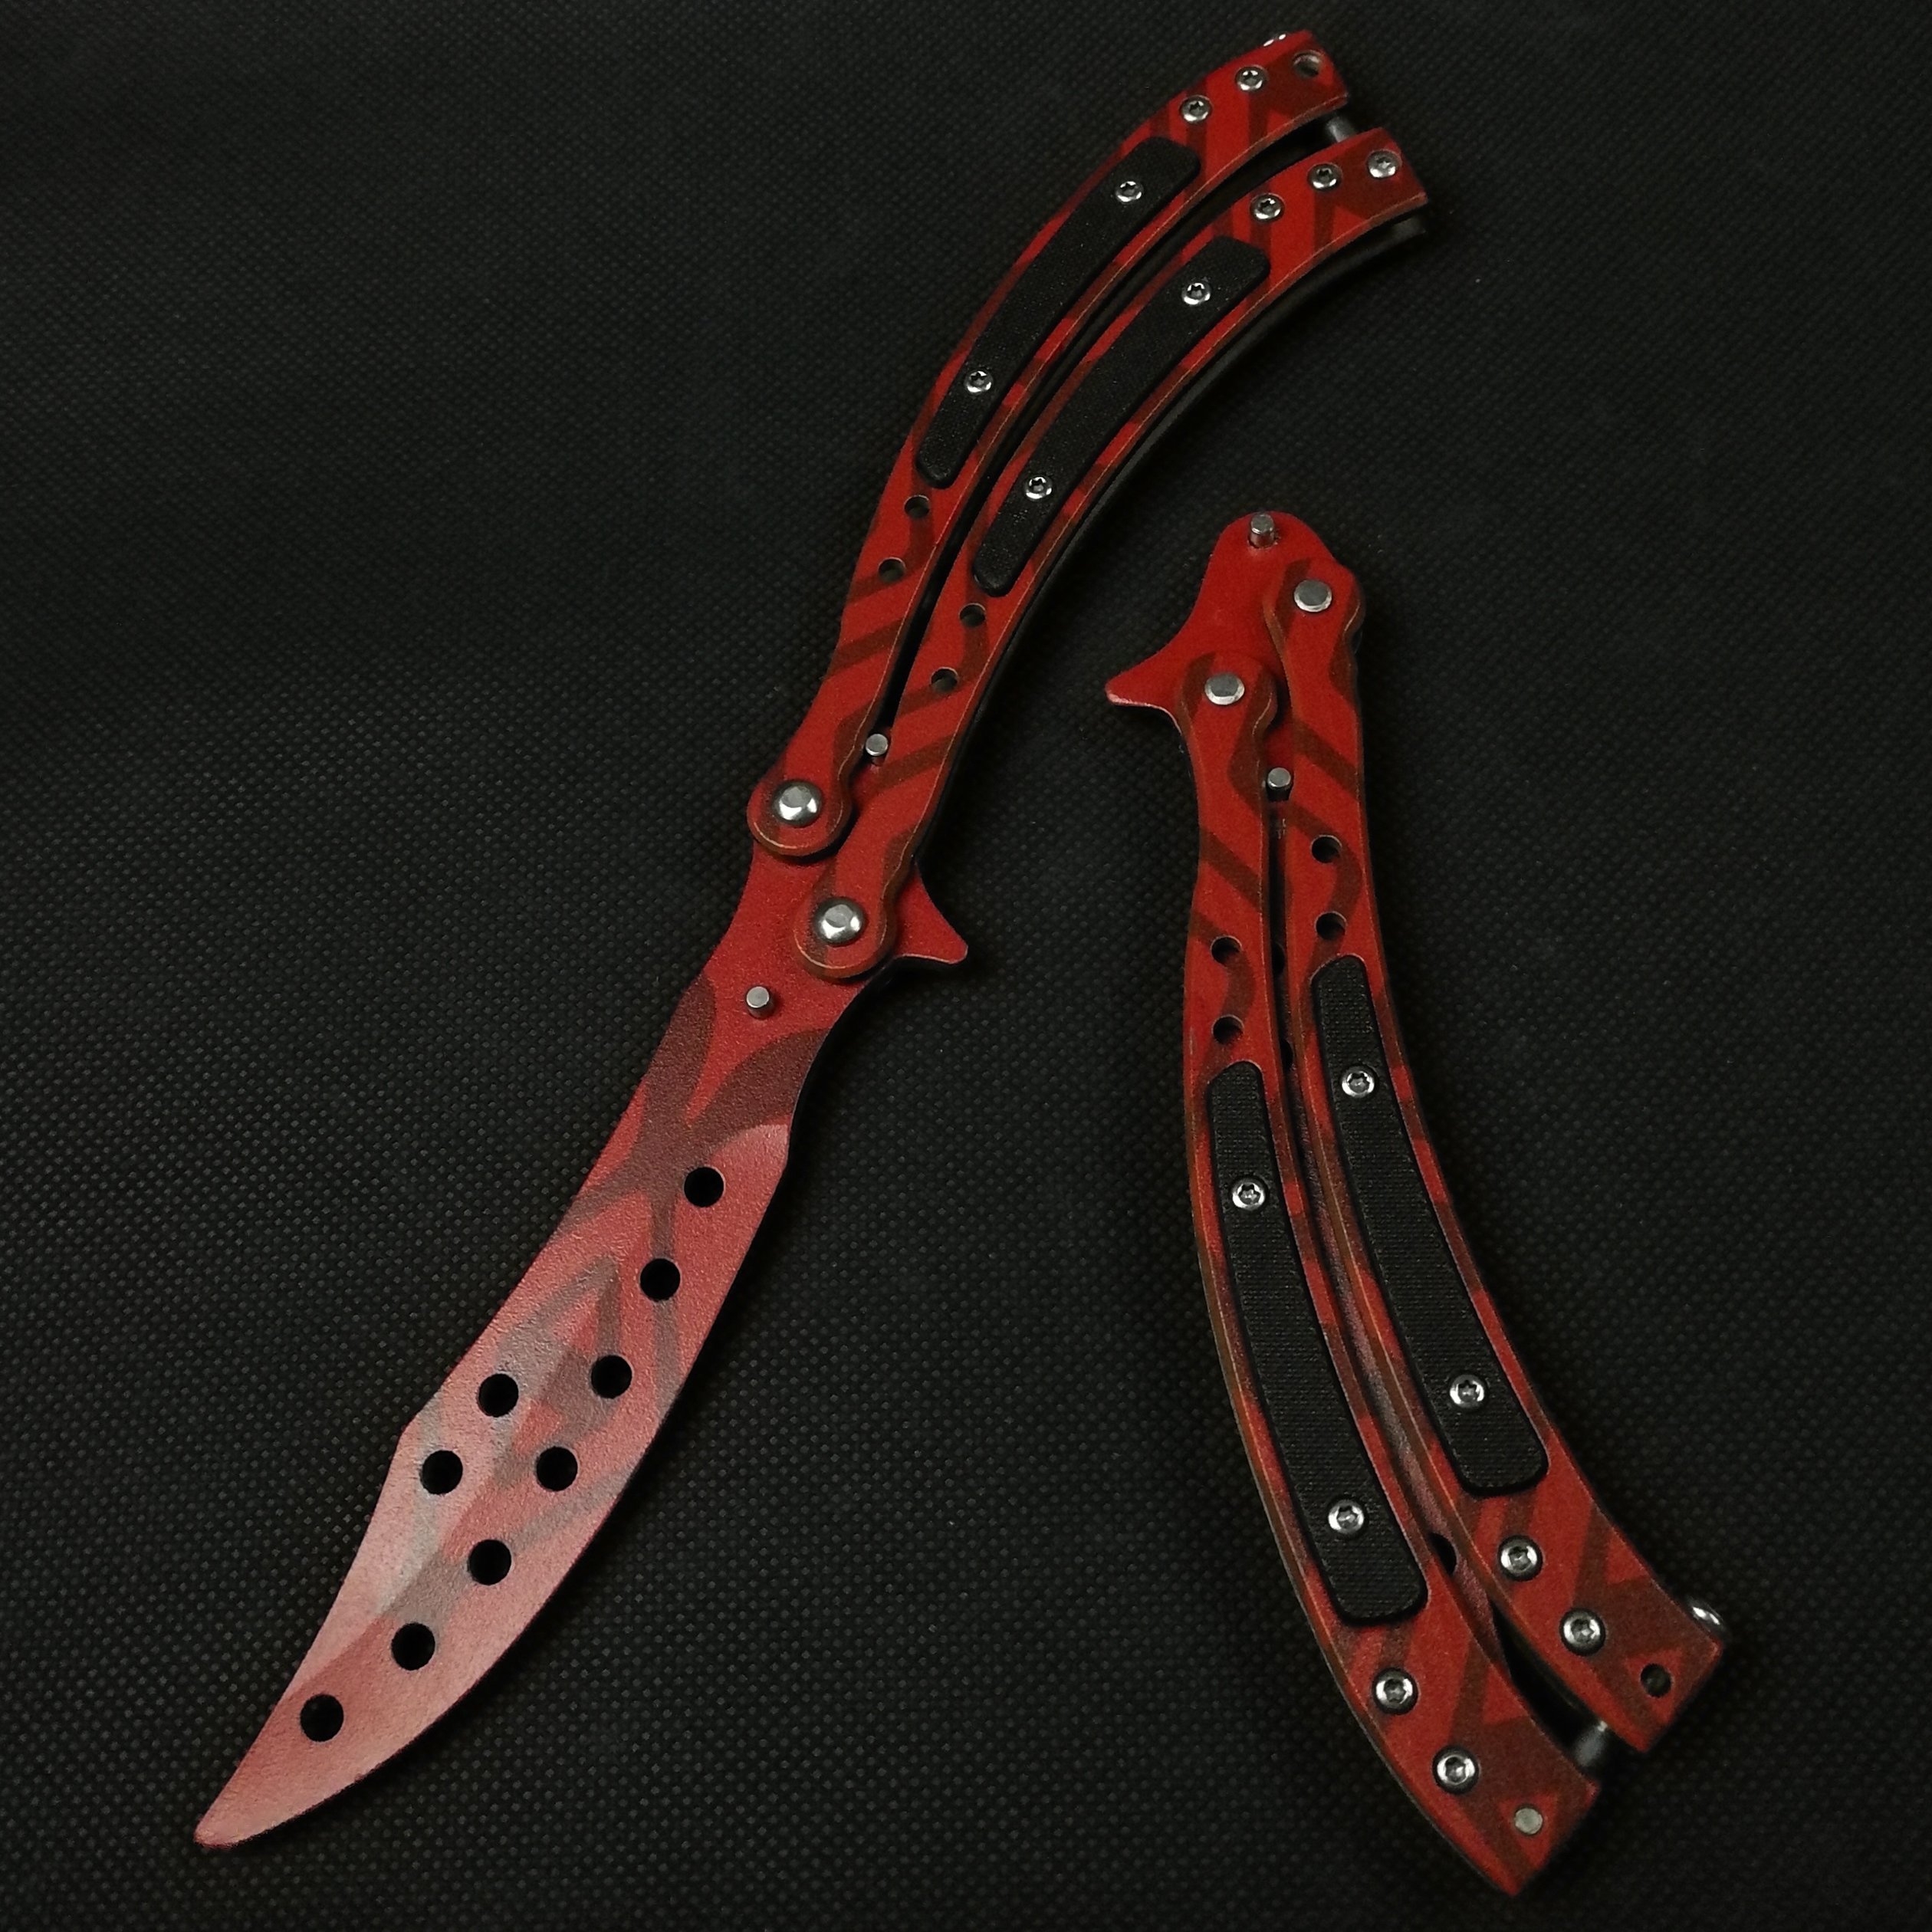 Butterfly Knife (нож-бабочка): КС